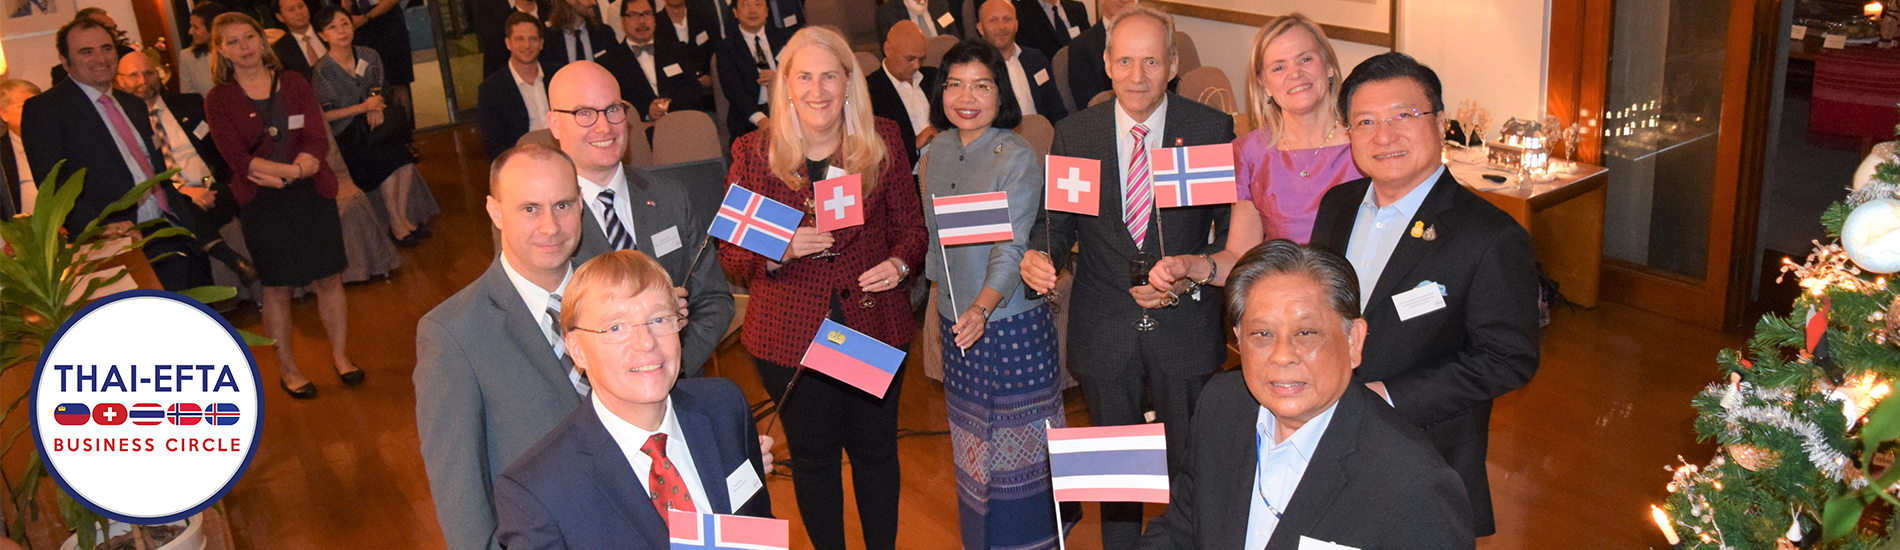 Exclusive Launch of the Thai-EFTA Business Circle